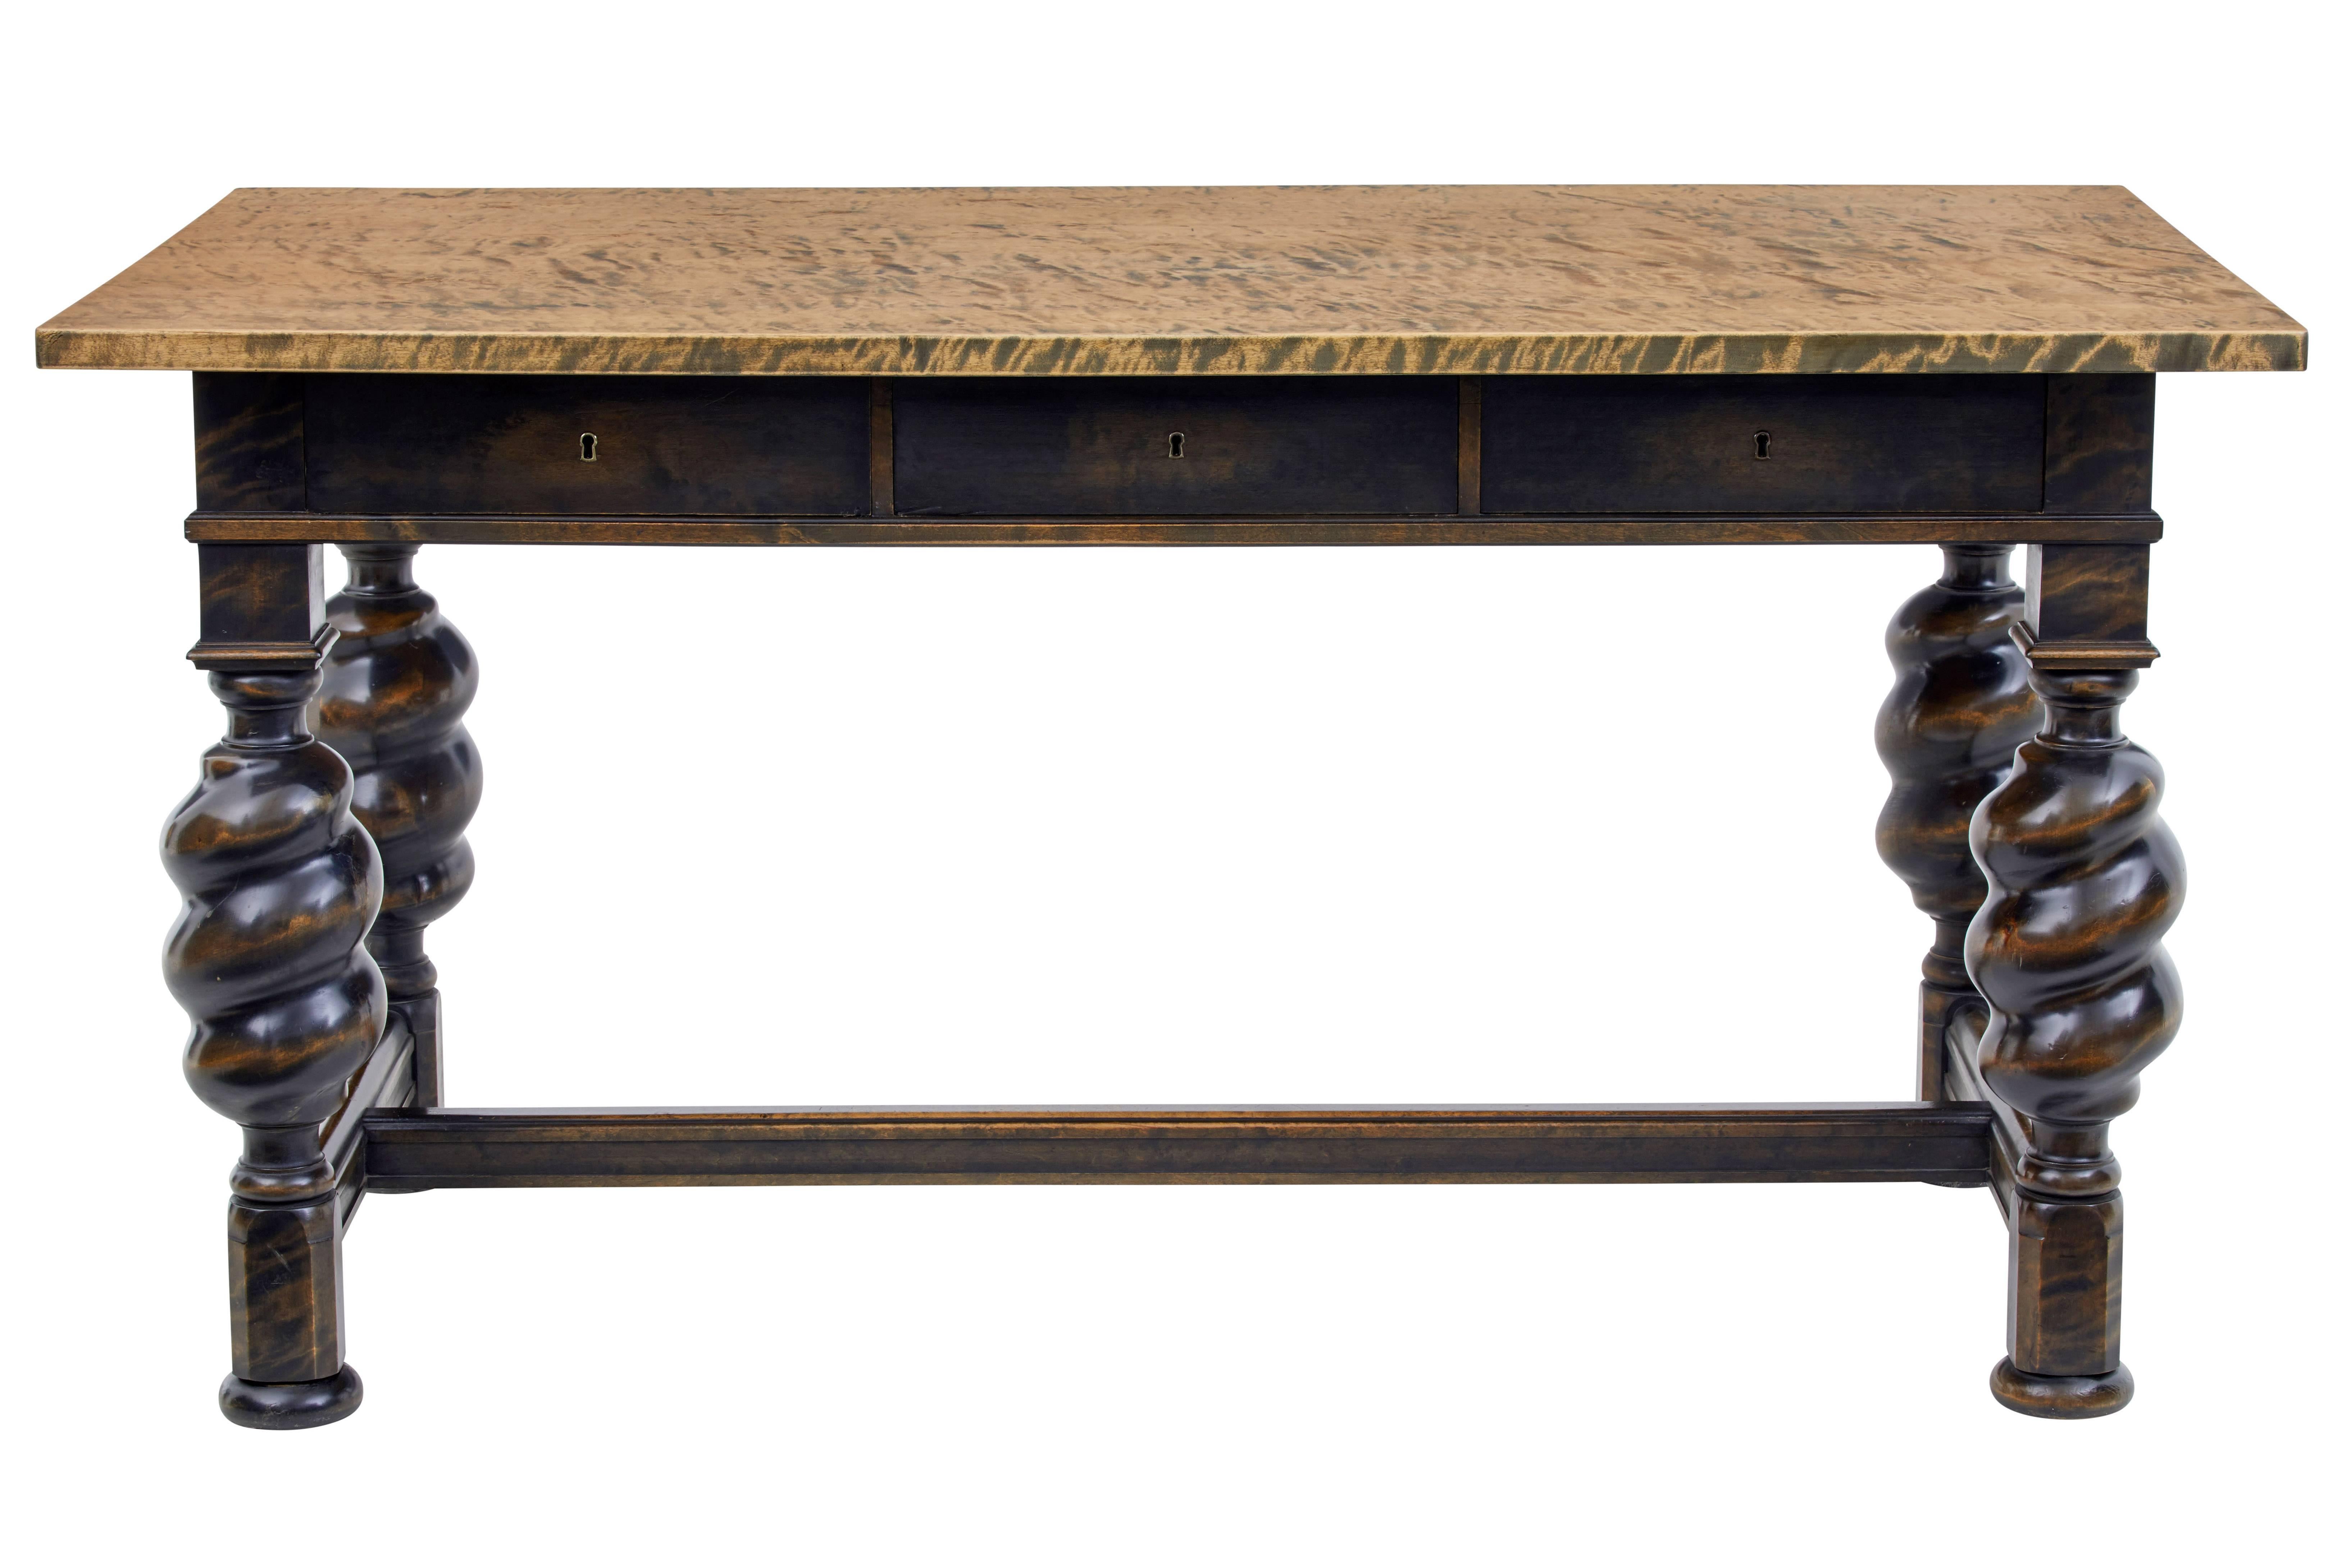 Unusual and good quality birch writing table desk, circa 1930.

Two tone dark base with contrasting golden birch top. Three full depth drawers to the front.

Standing on four turned baluster legs, united by H-frame stretcher. Standing on flat